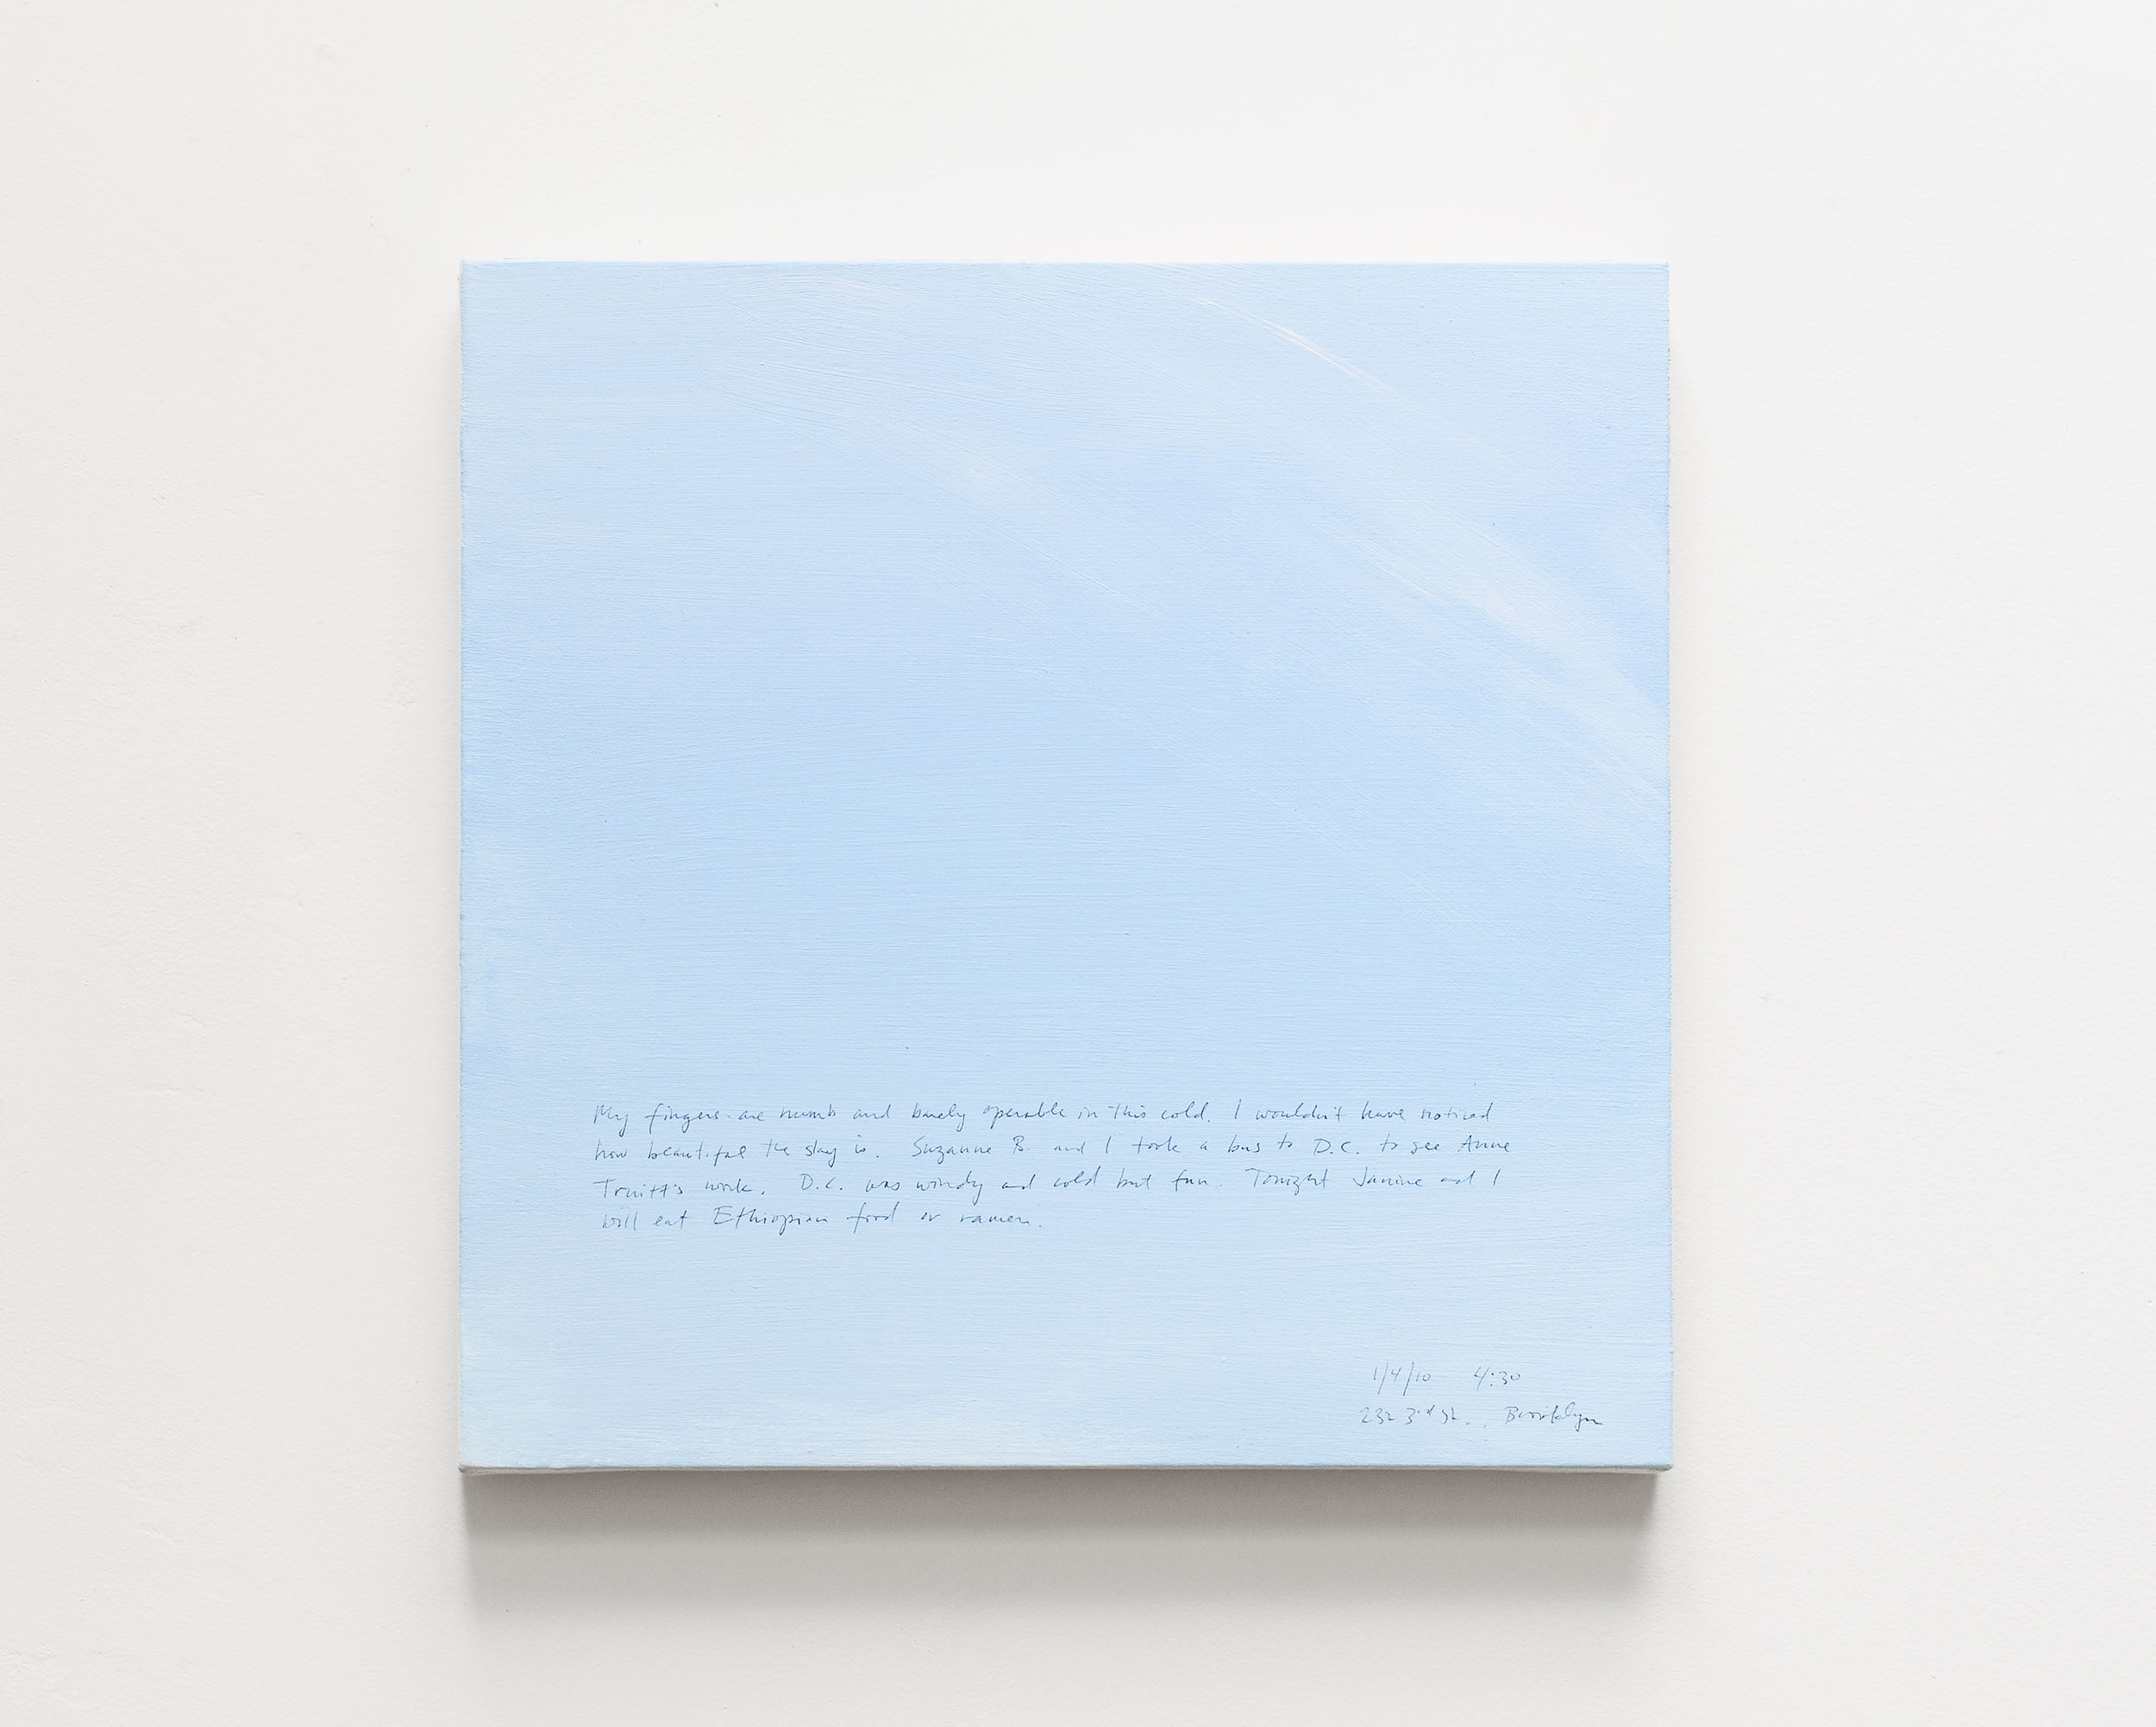 A 14 × 14 inch, acrylic painting of the sky. A journal entry is handwritten on the painting:

“My fingers are numb and barely operable in this cold. I wouldn’t have noticed how beautiful the sky is. Suzanne B. and I took a bus to D.C. to see Anne Truitt’s work. D.C. was windy and cold but fun. Tonight Janine and I will eat Ethiopian food or ramen.

1/4/10  4:30  232 3rd St., Brooklyn”